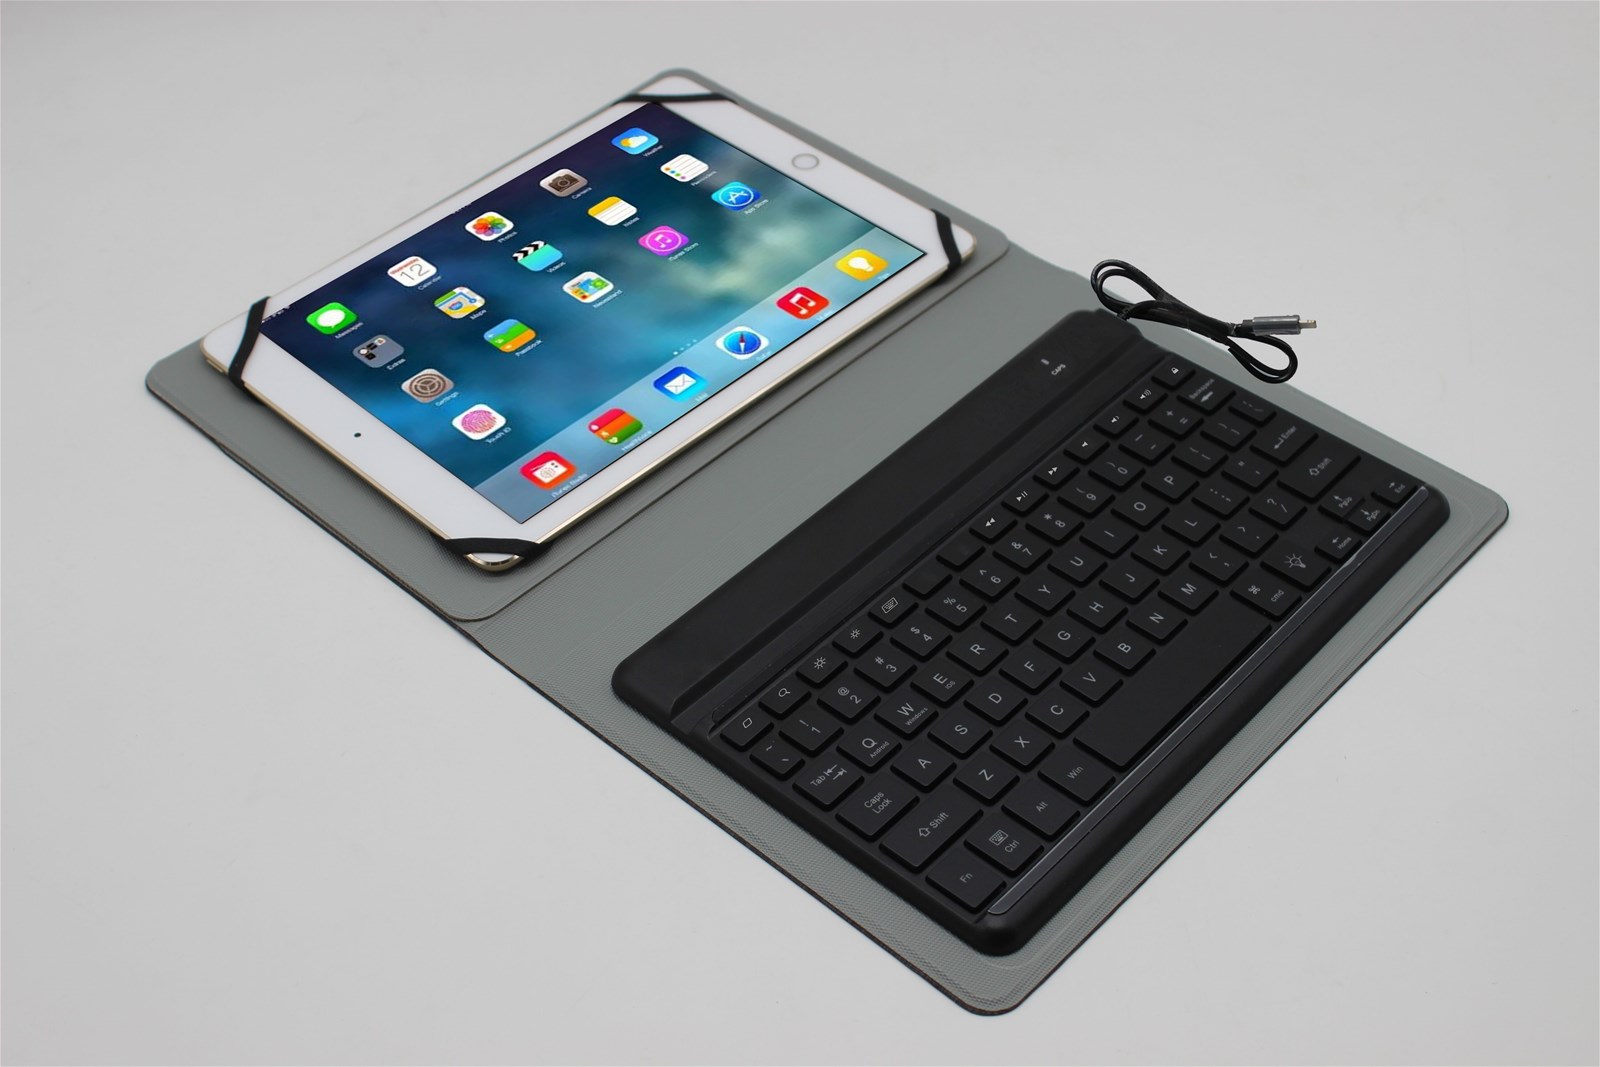 Lightning connector keyboard case for IOS devices with MFI certificate